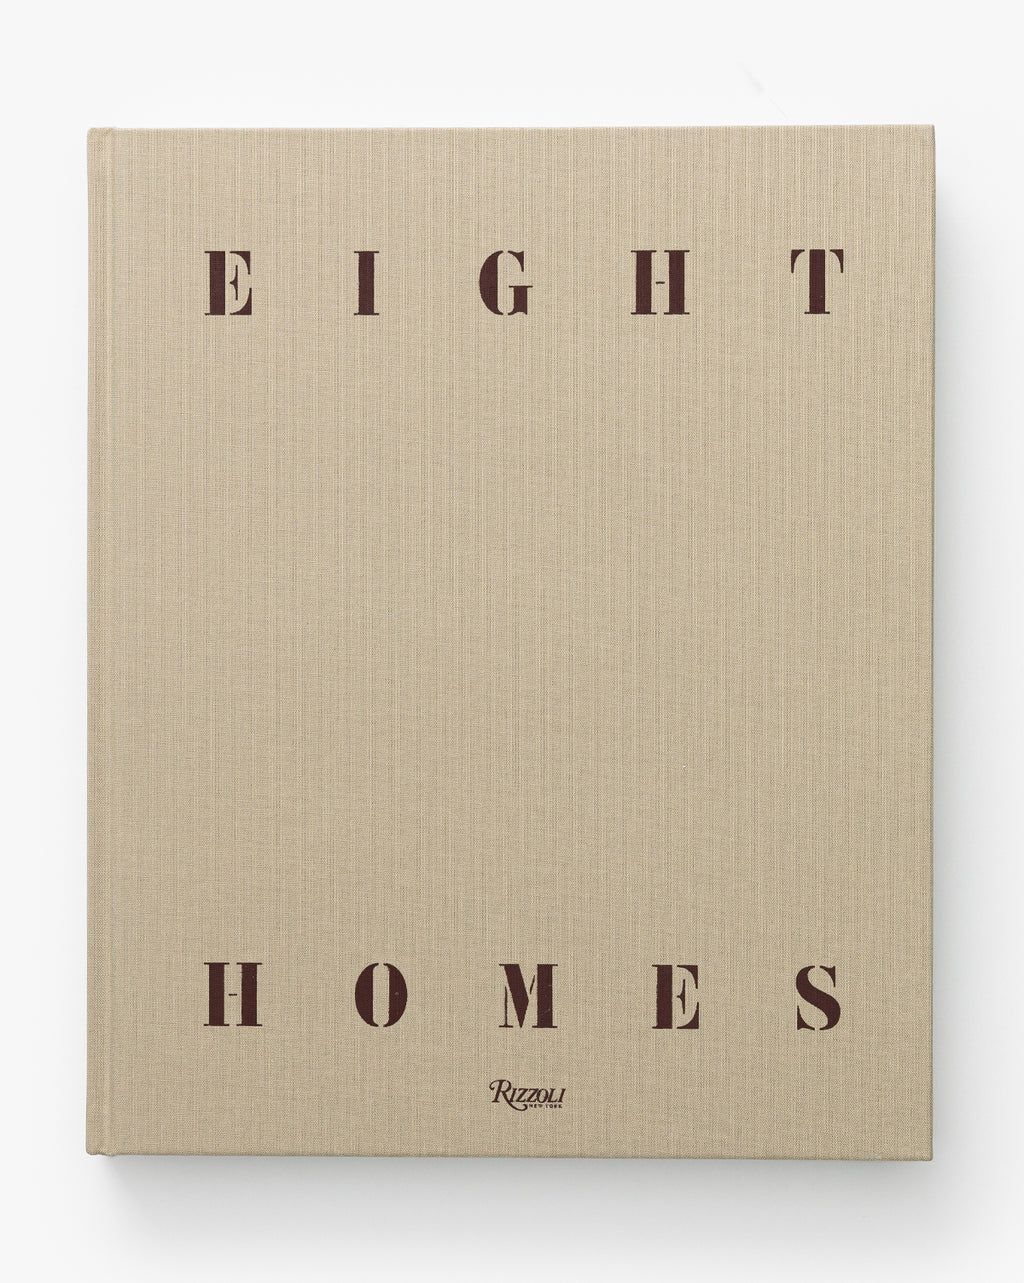 Eight Homes | McGee & Co.